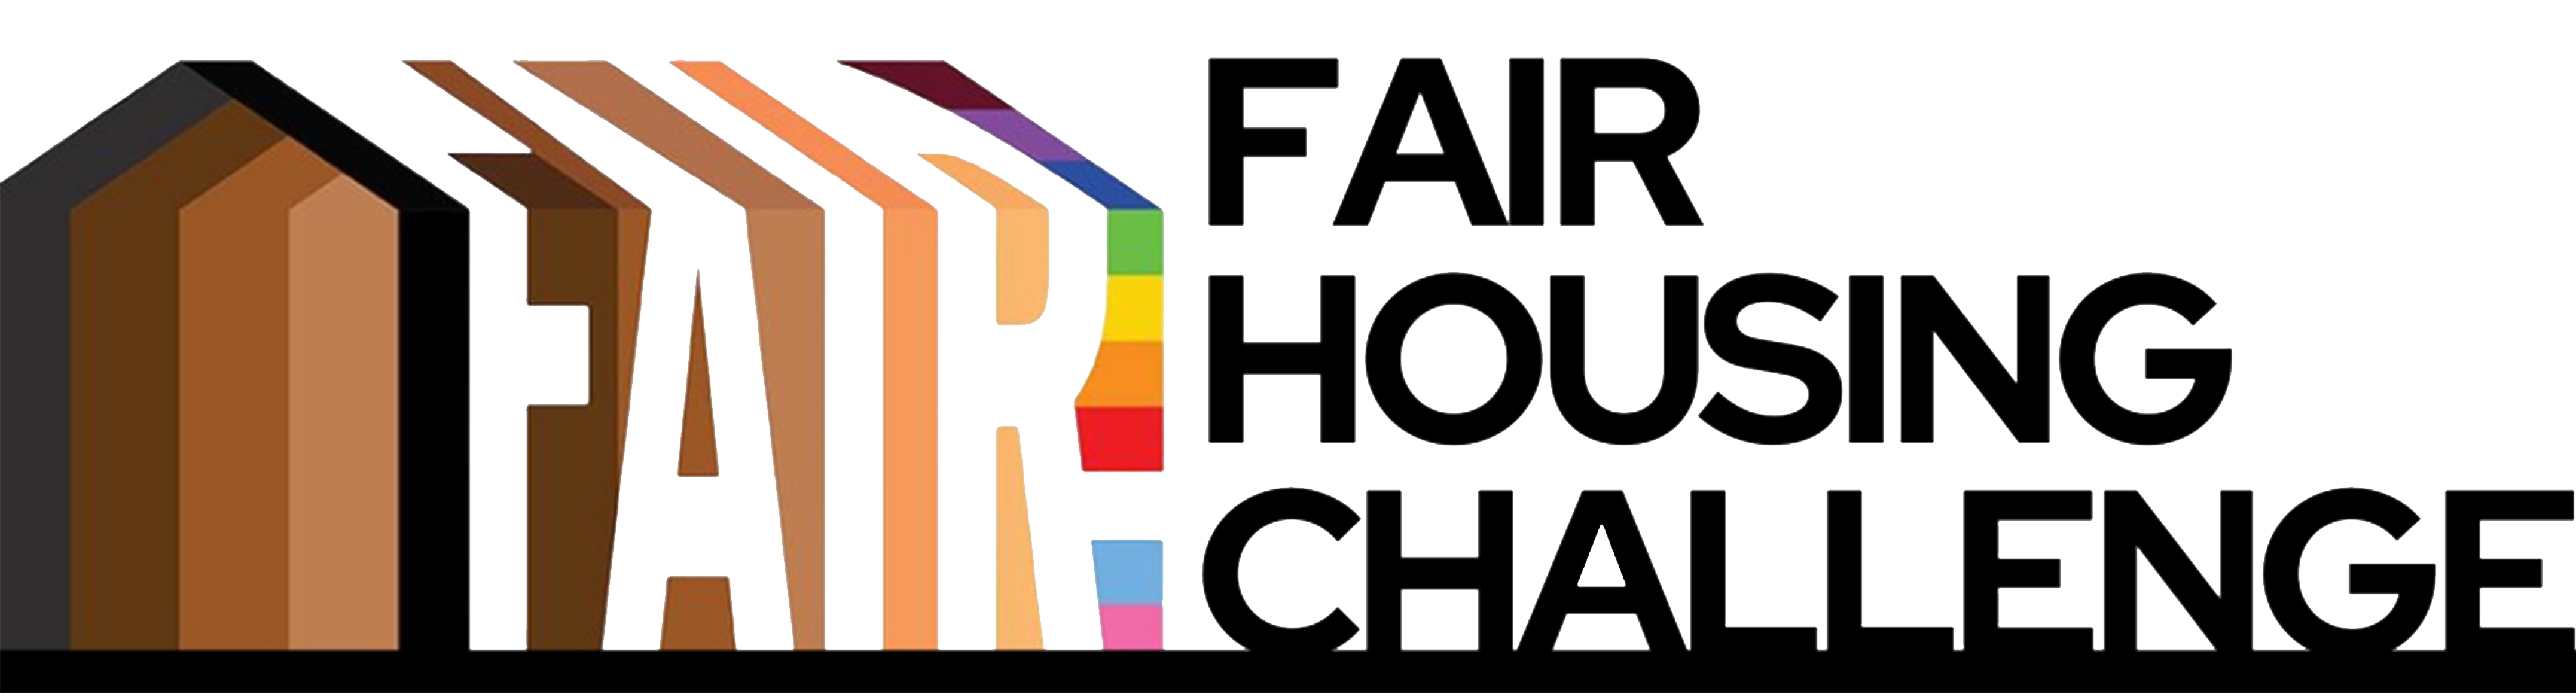 word graphic that says fair housing challenge in black. Fair is written again on left side in skin tone colors